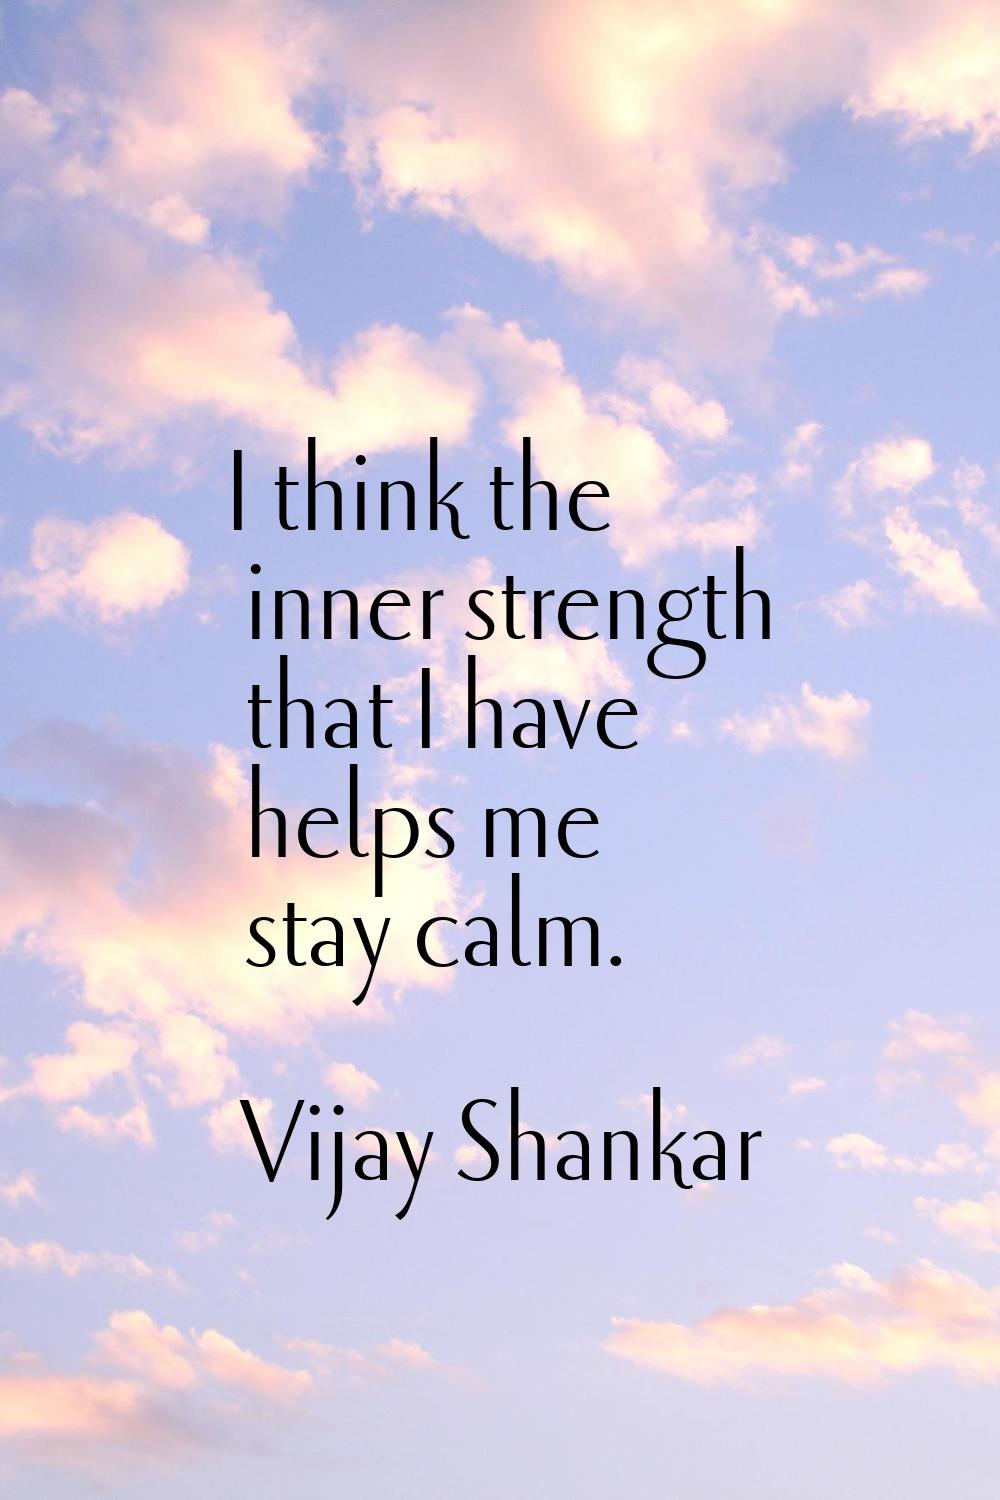 I think the inner strength that I have helps me stay calm.